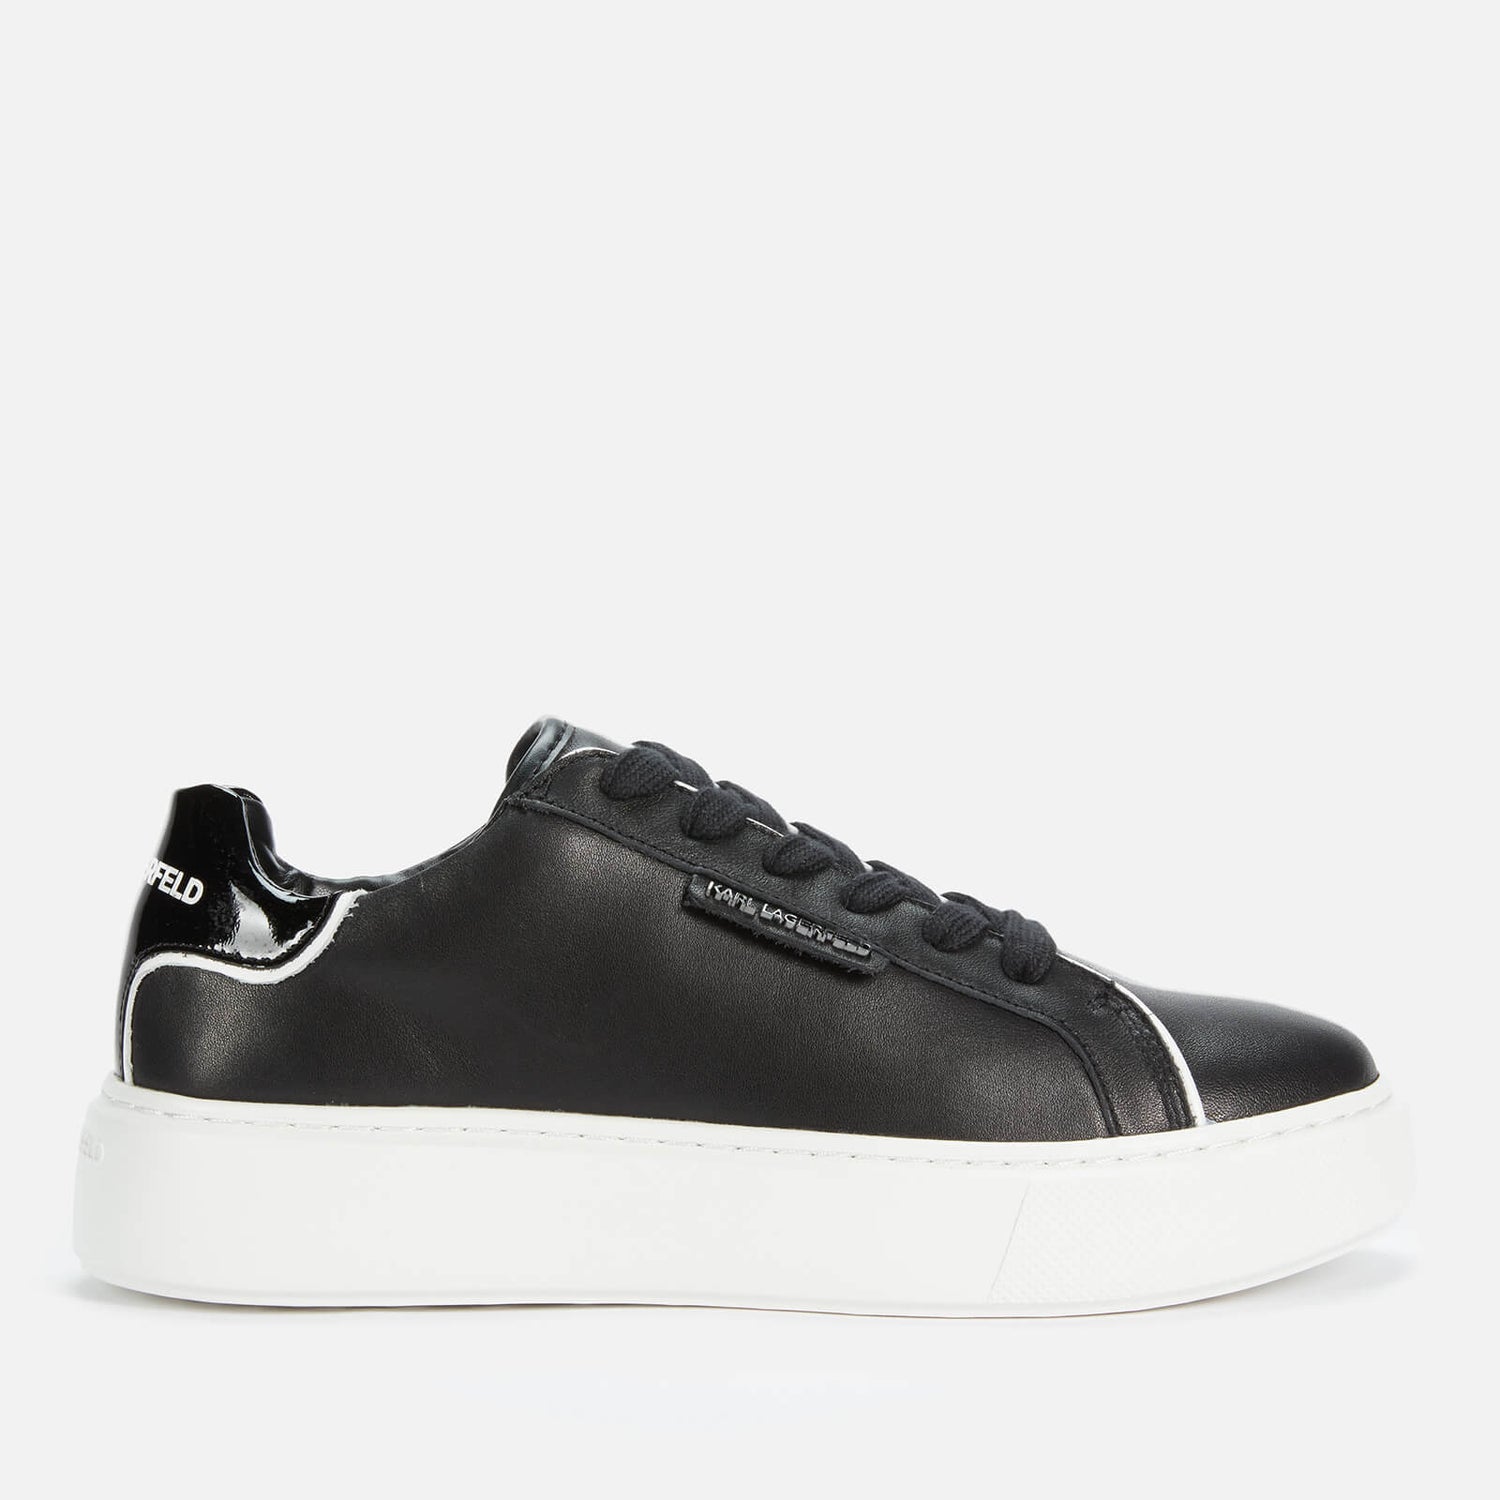 KARL LAGERFELD Women's Maxi Kup Lo Lace Leather Flatform Trainers ...